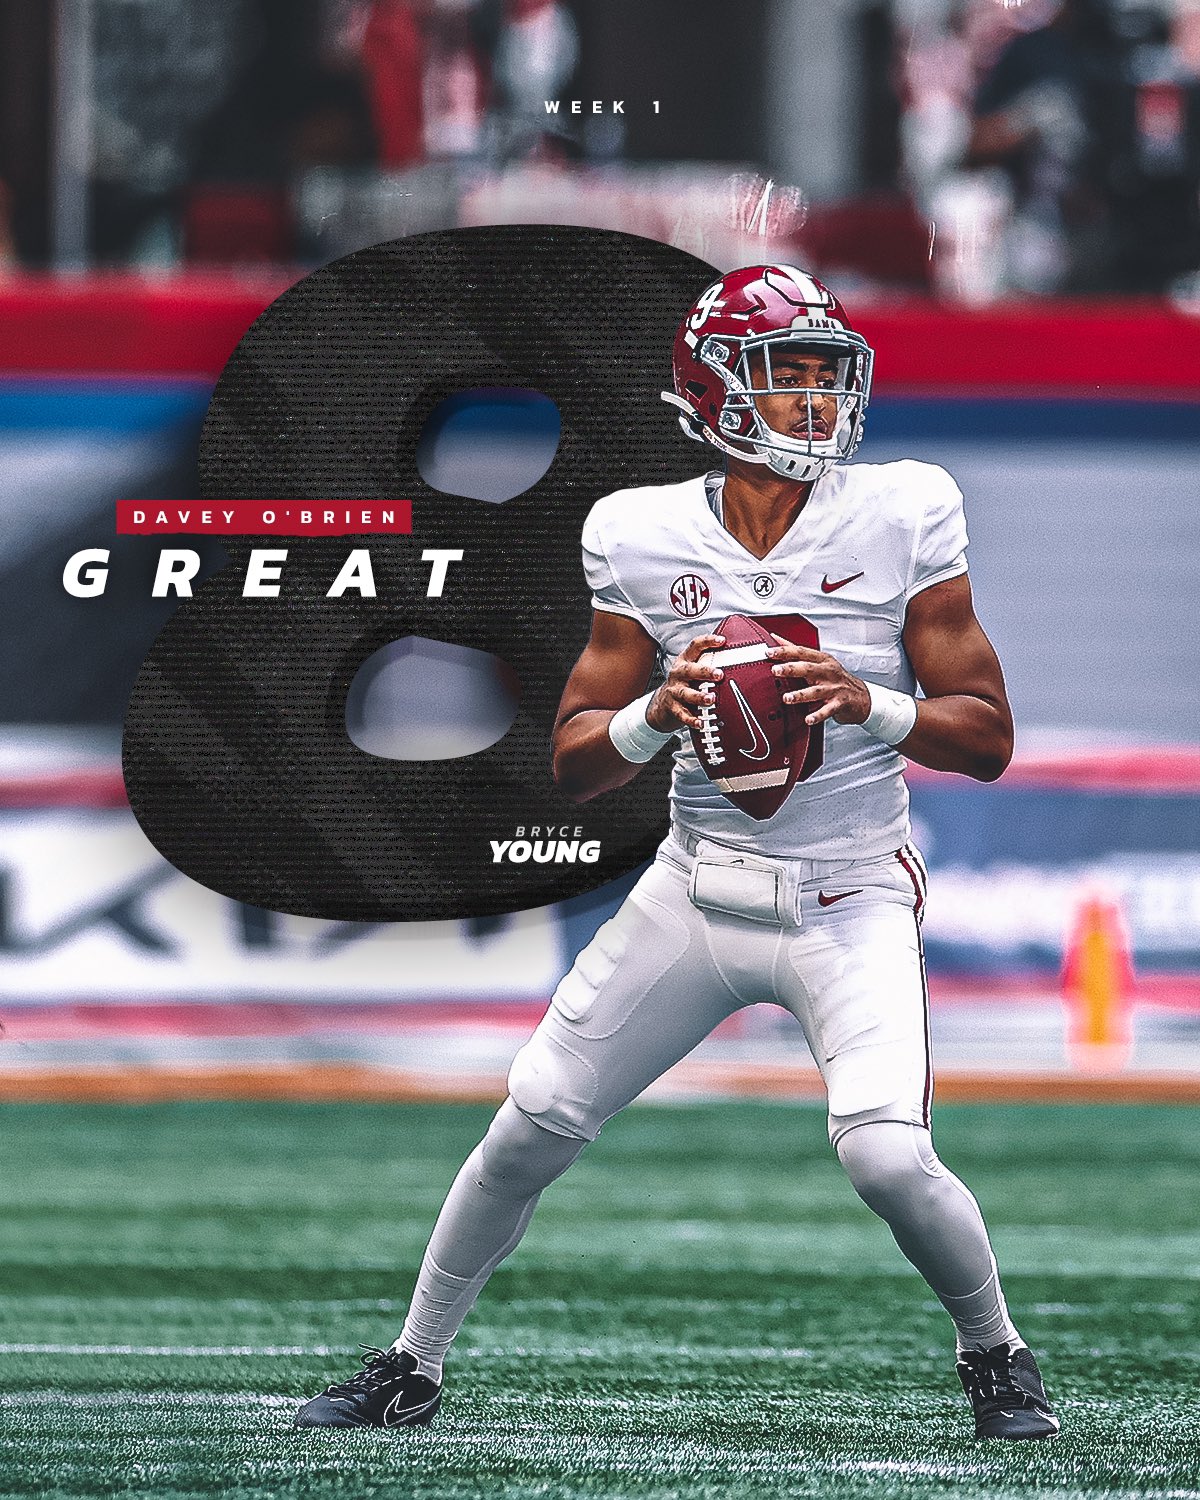 Alabama Football 1 ✗ Great 8 Bryce Young was one of eight quarterbacks named to weekly honor. #BamaFactor #RollTide